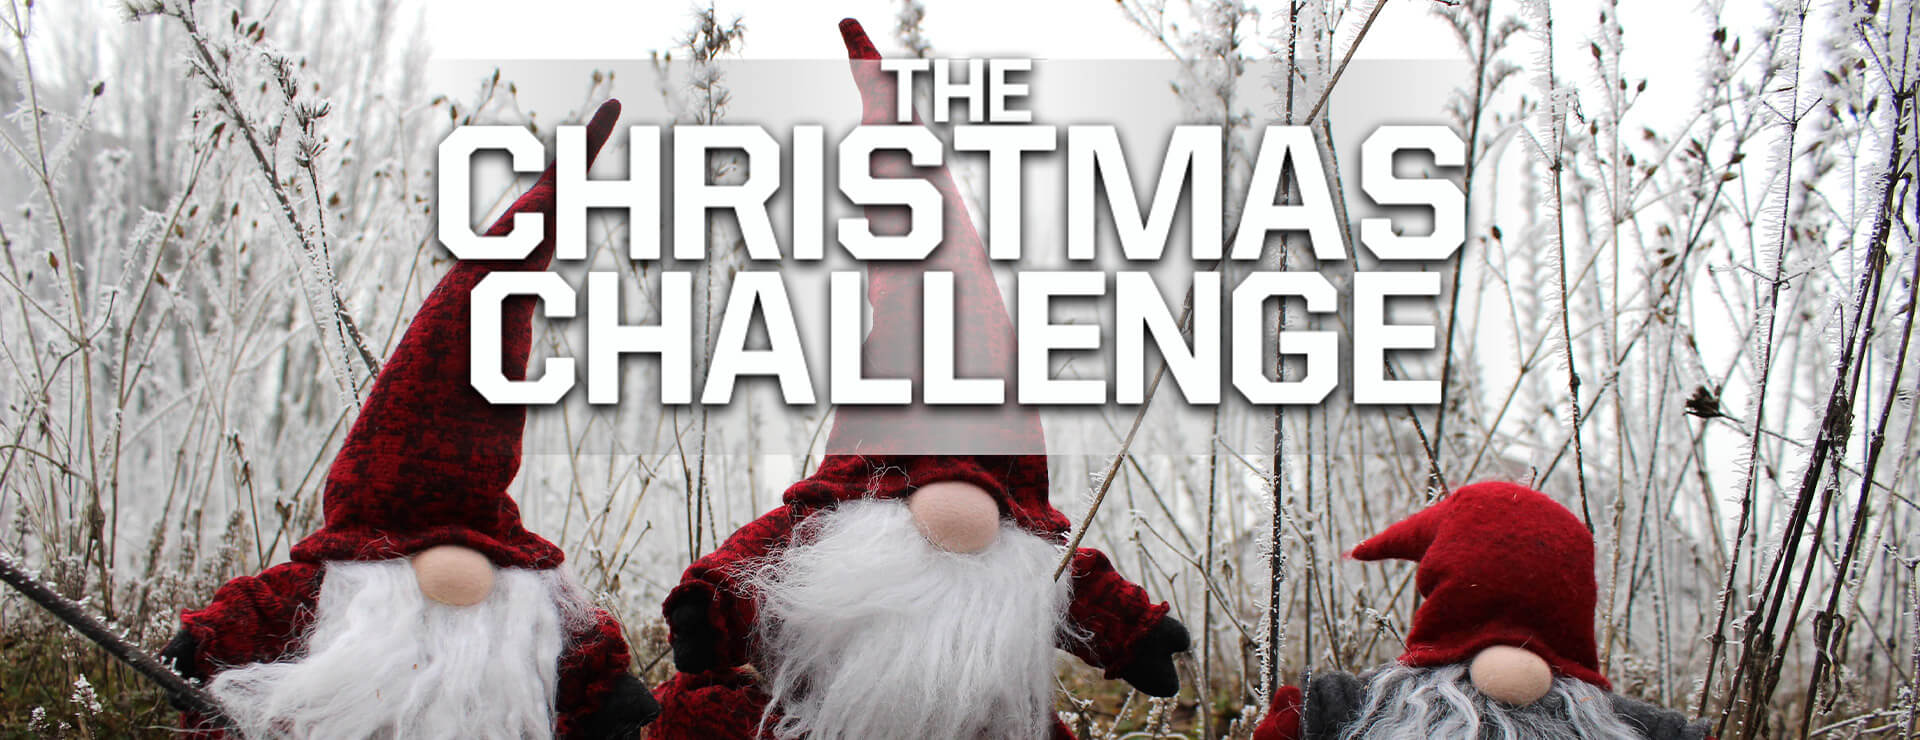 The Christmas Challenge - Puzzle Game